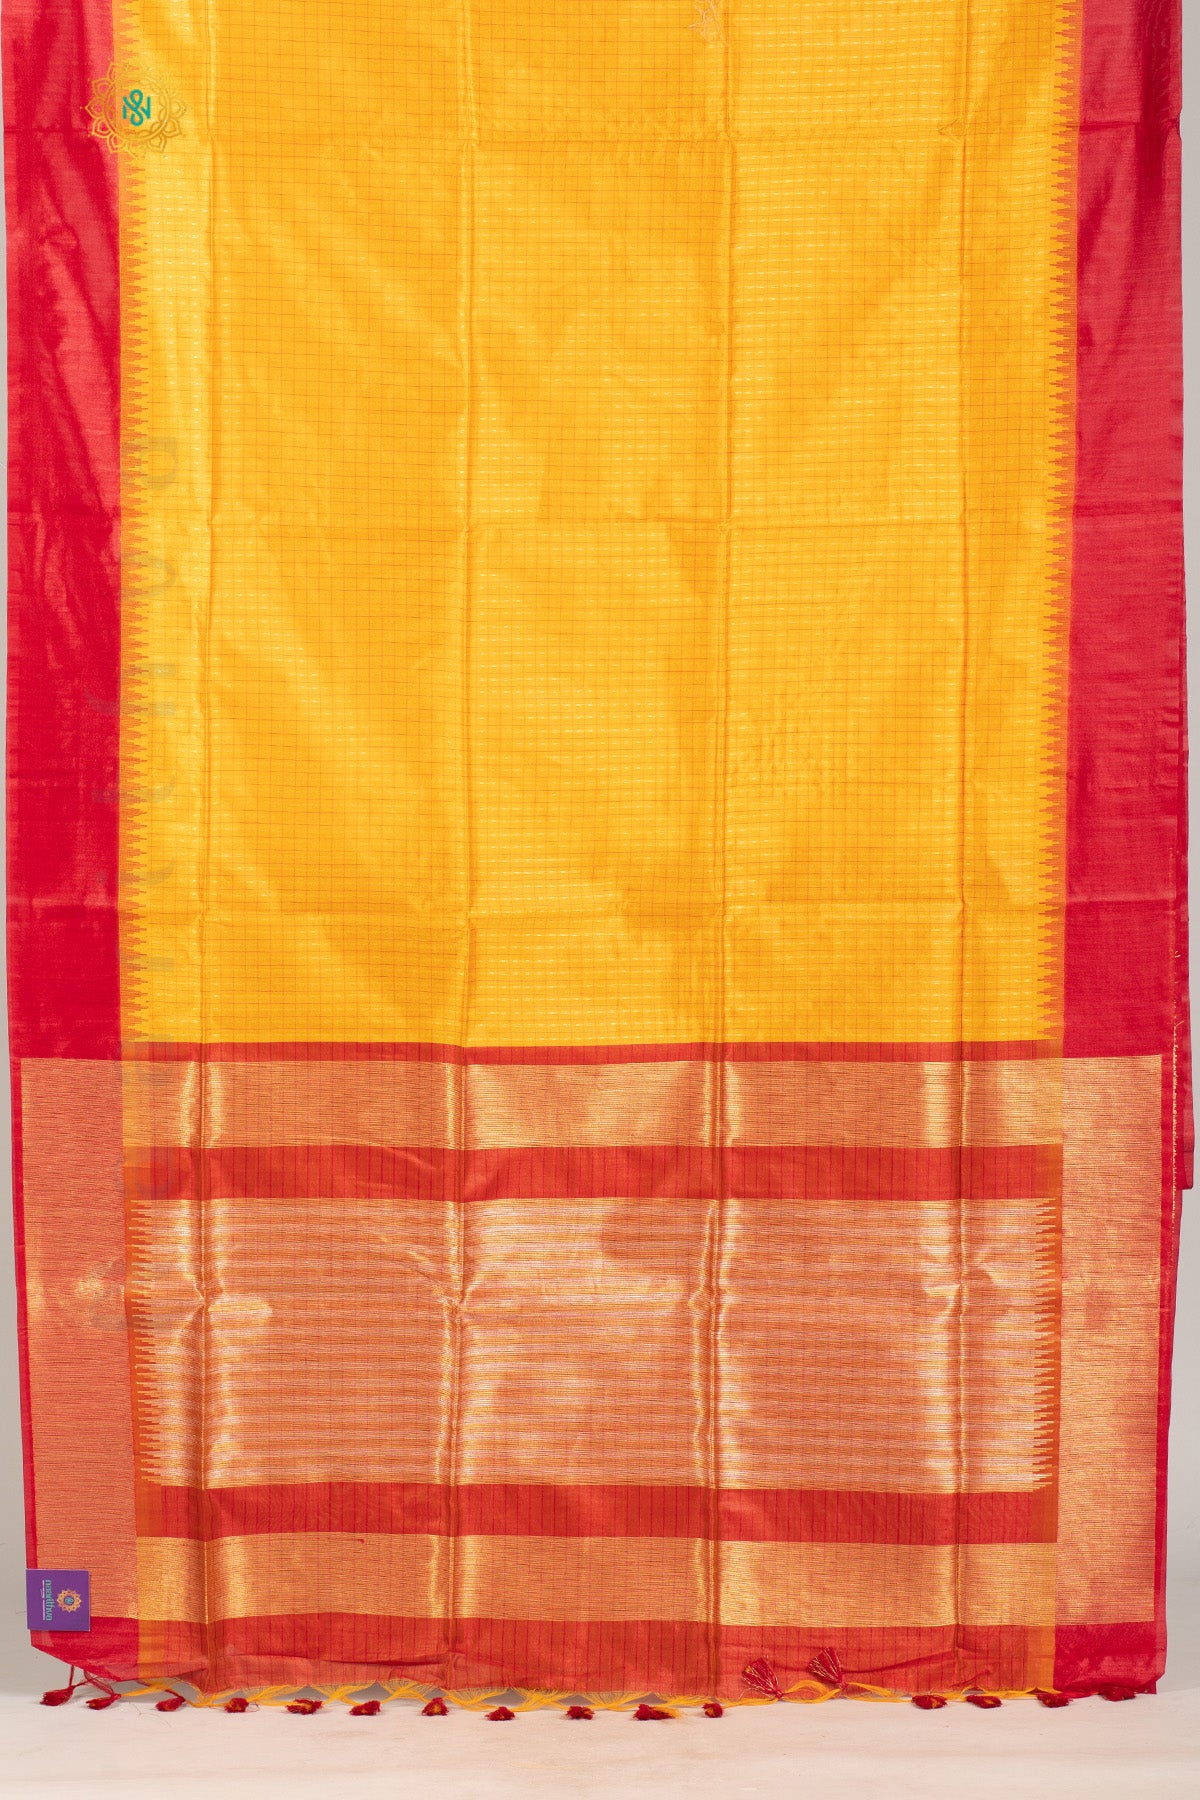 YELLOW WITH RED - SEMI RAW SILK WITH ZARI WEAVING & CONTRAST TEMPLE BORDER